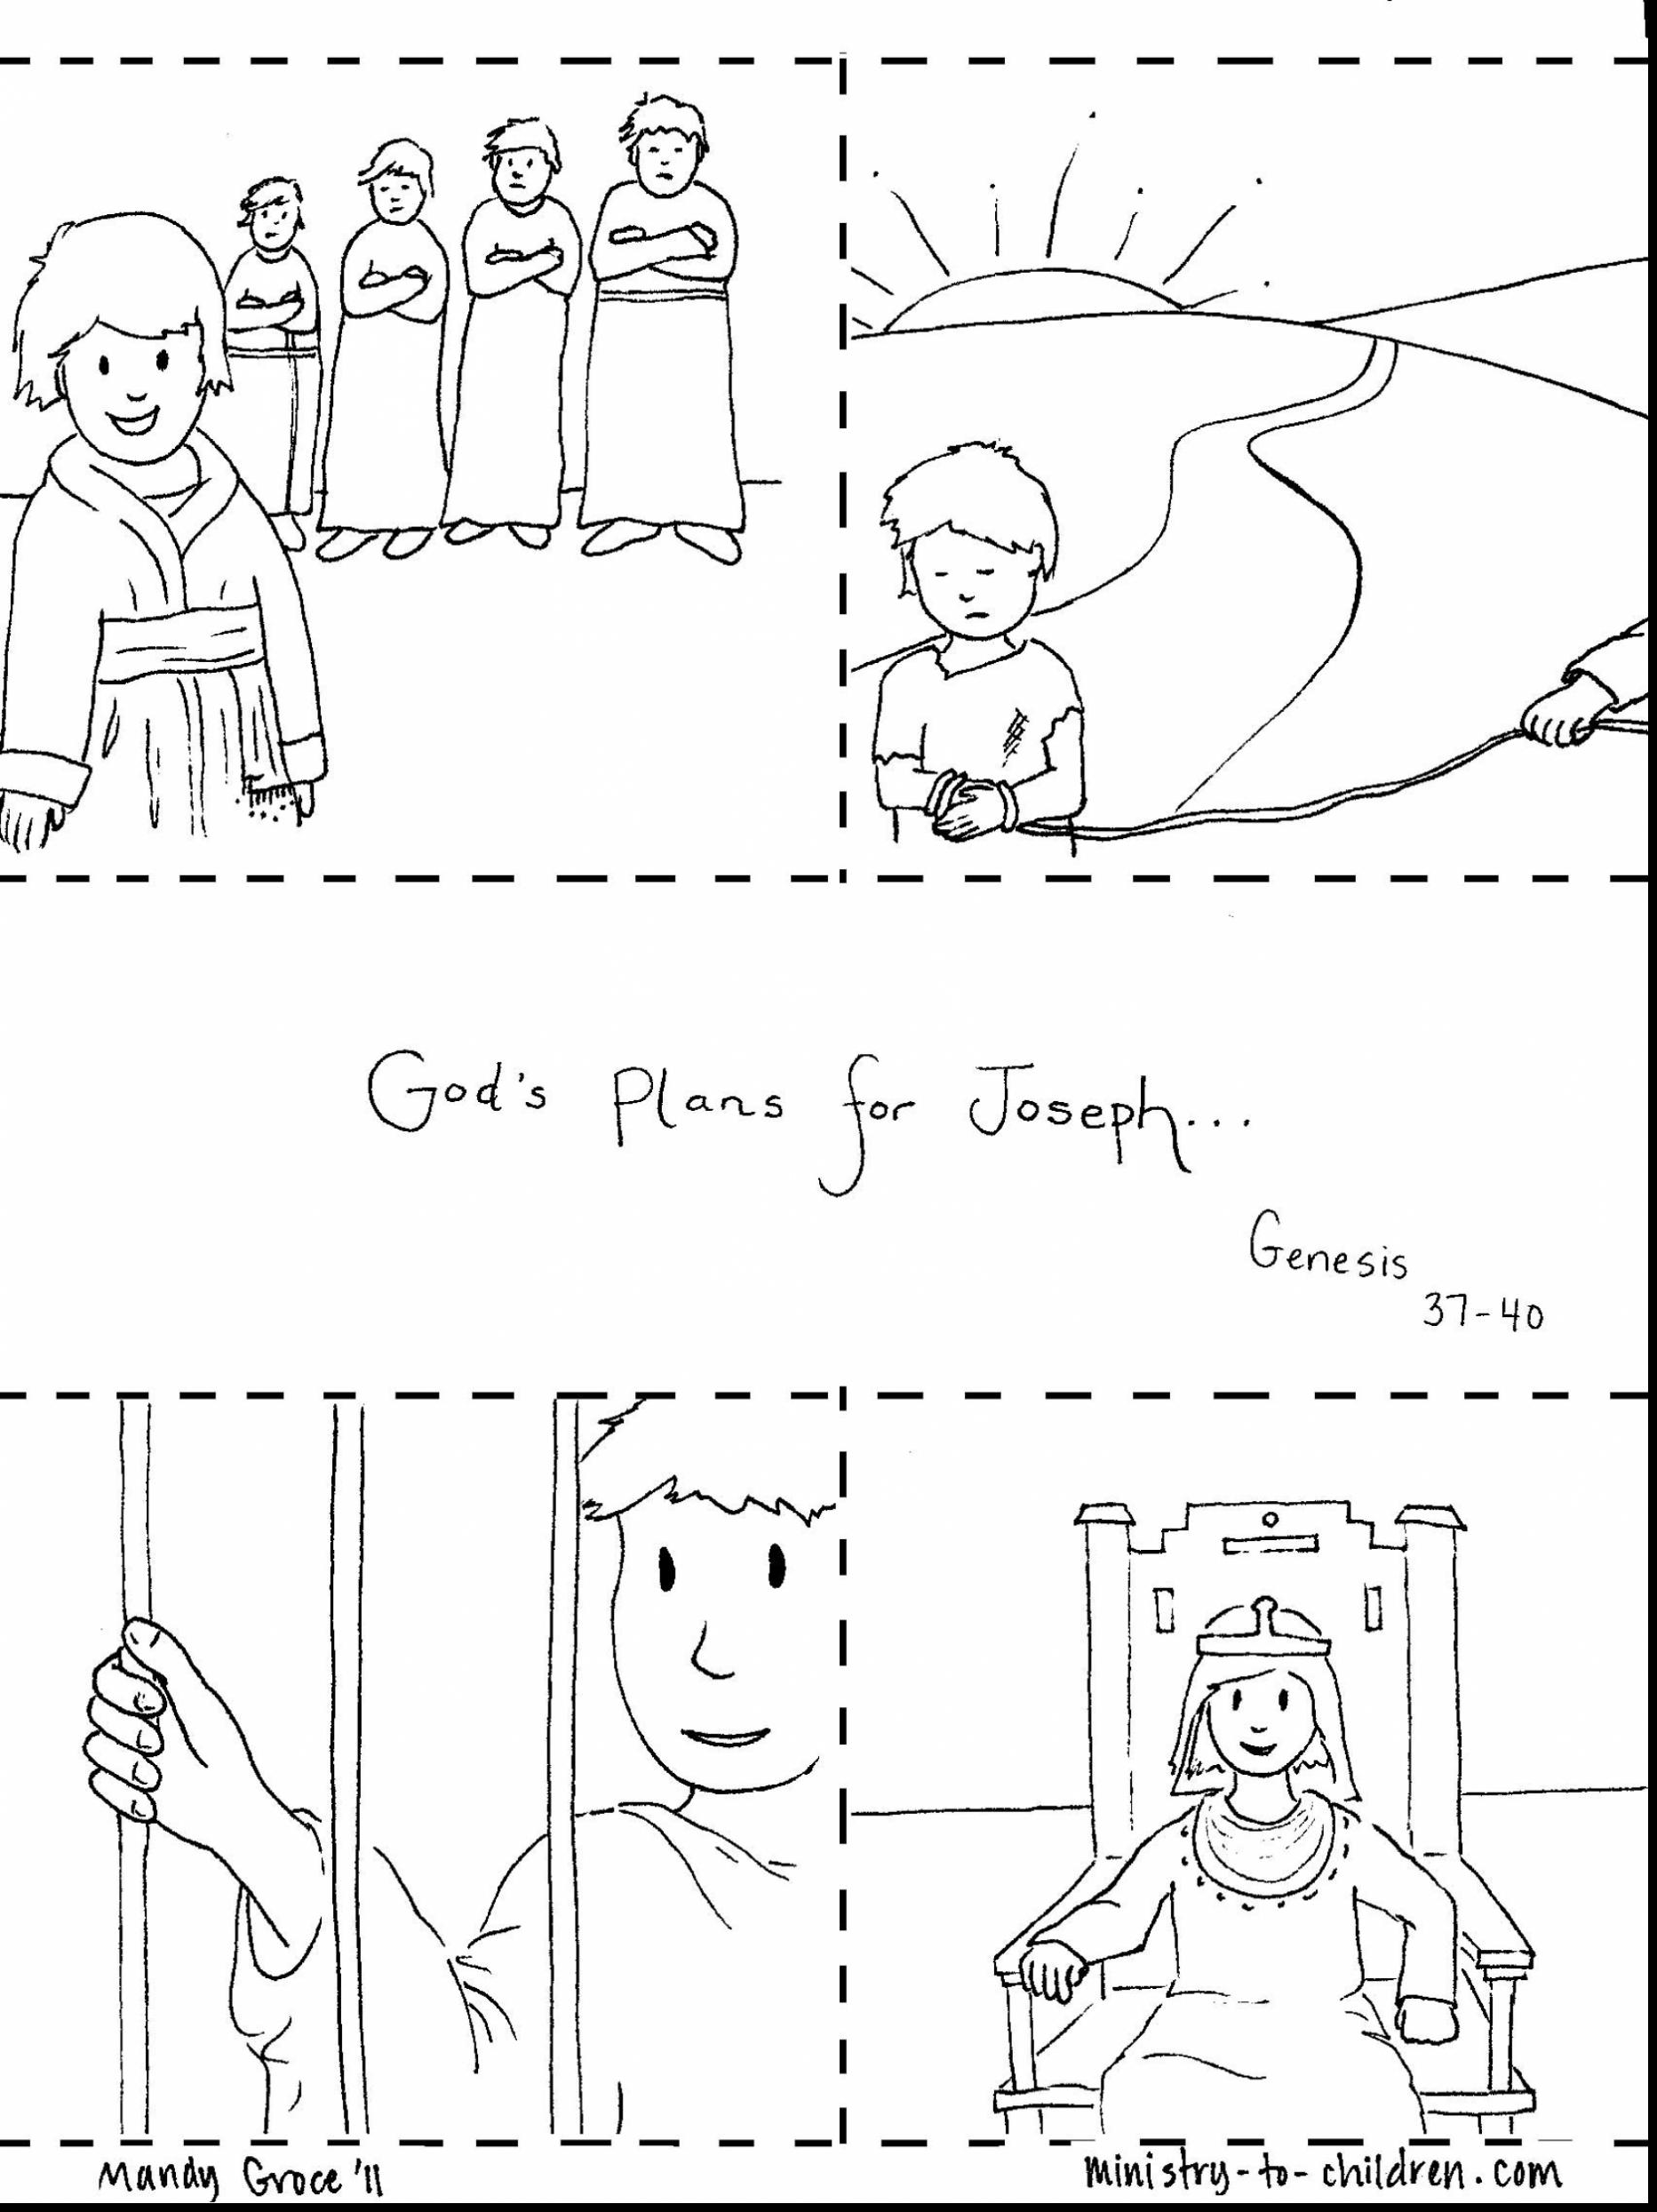 Joseph Bible Story Coloring Pages at GetColorings.com | Free printable